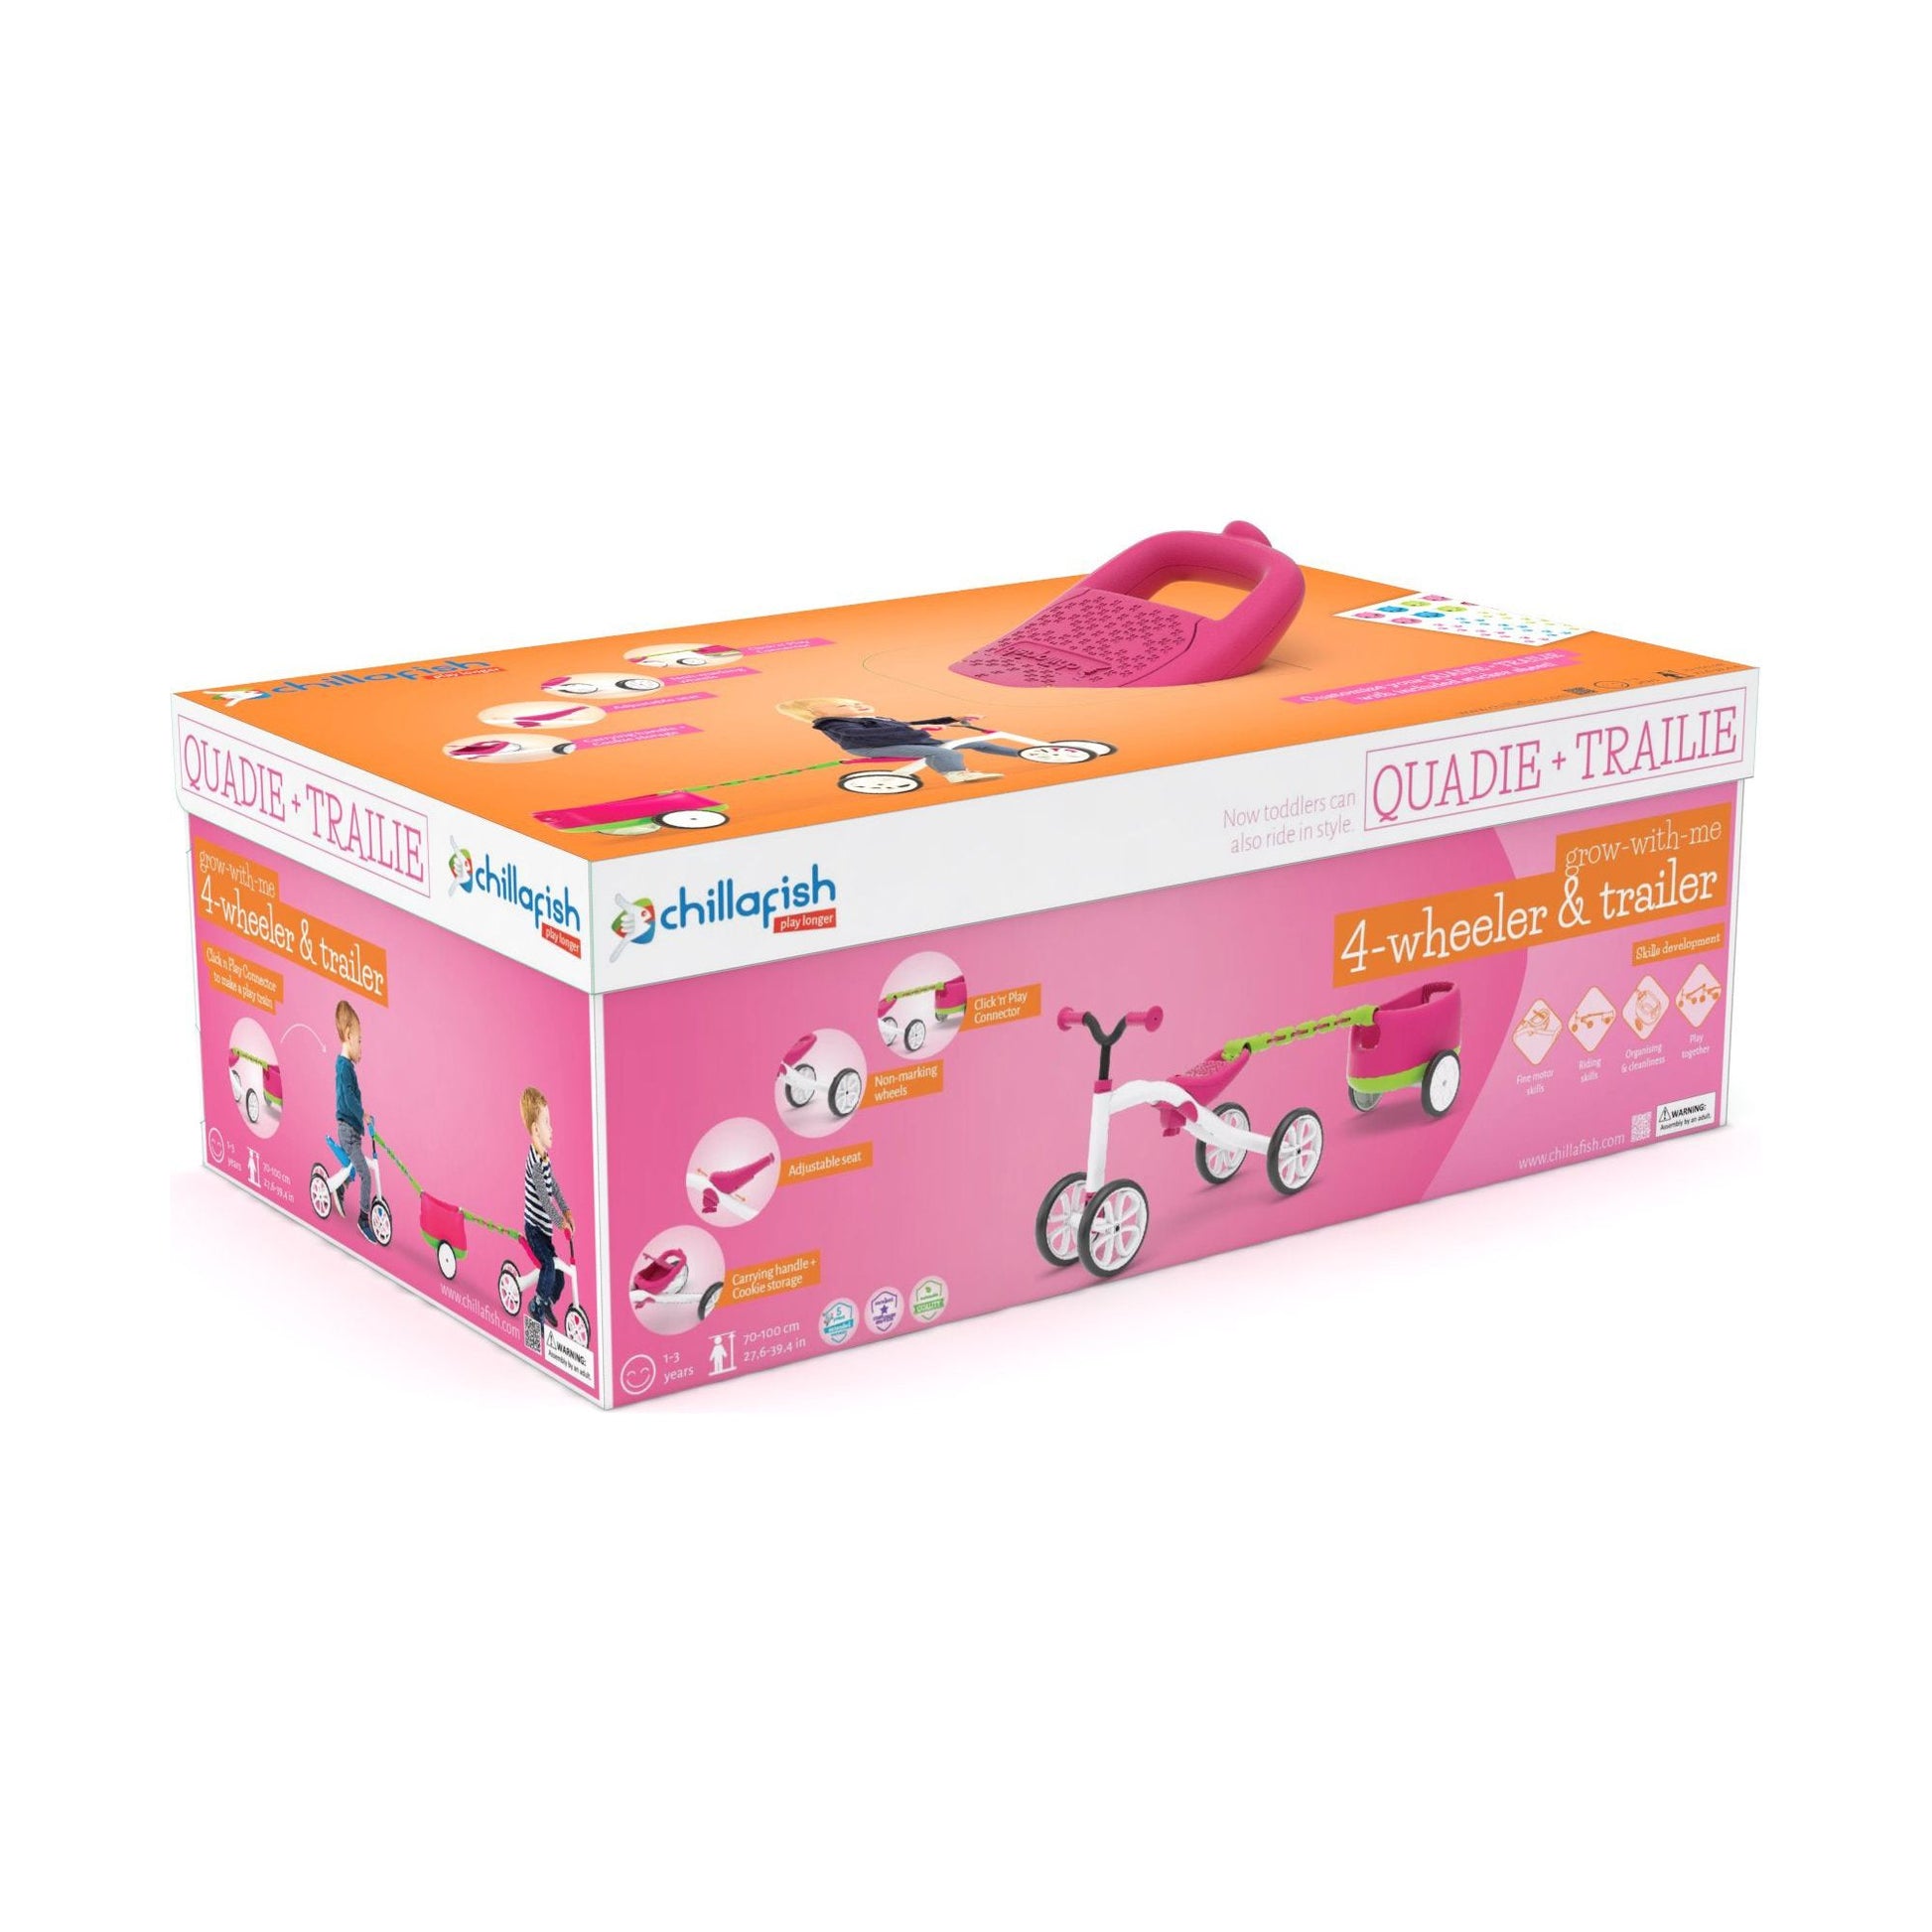 Chillafish Quadie and Trailie Ride-On Pink box